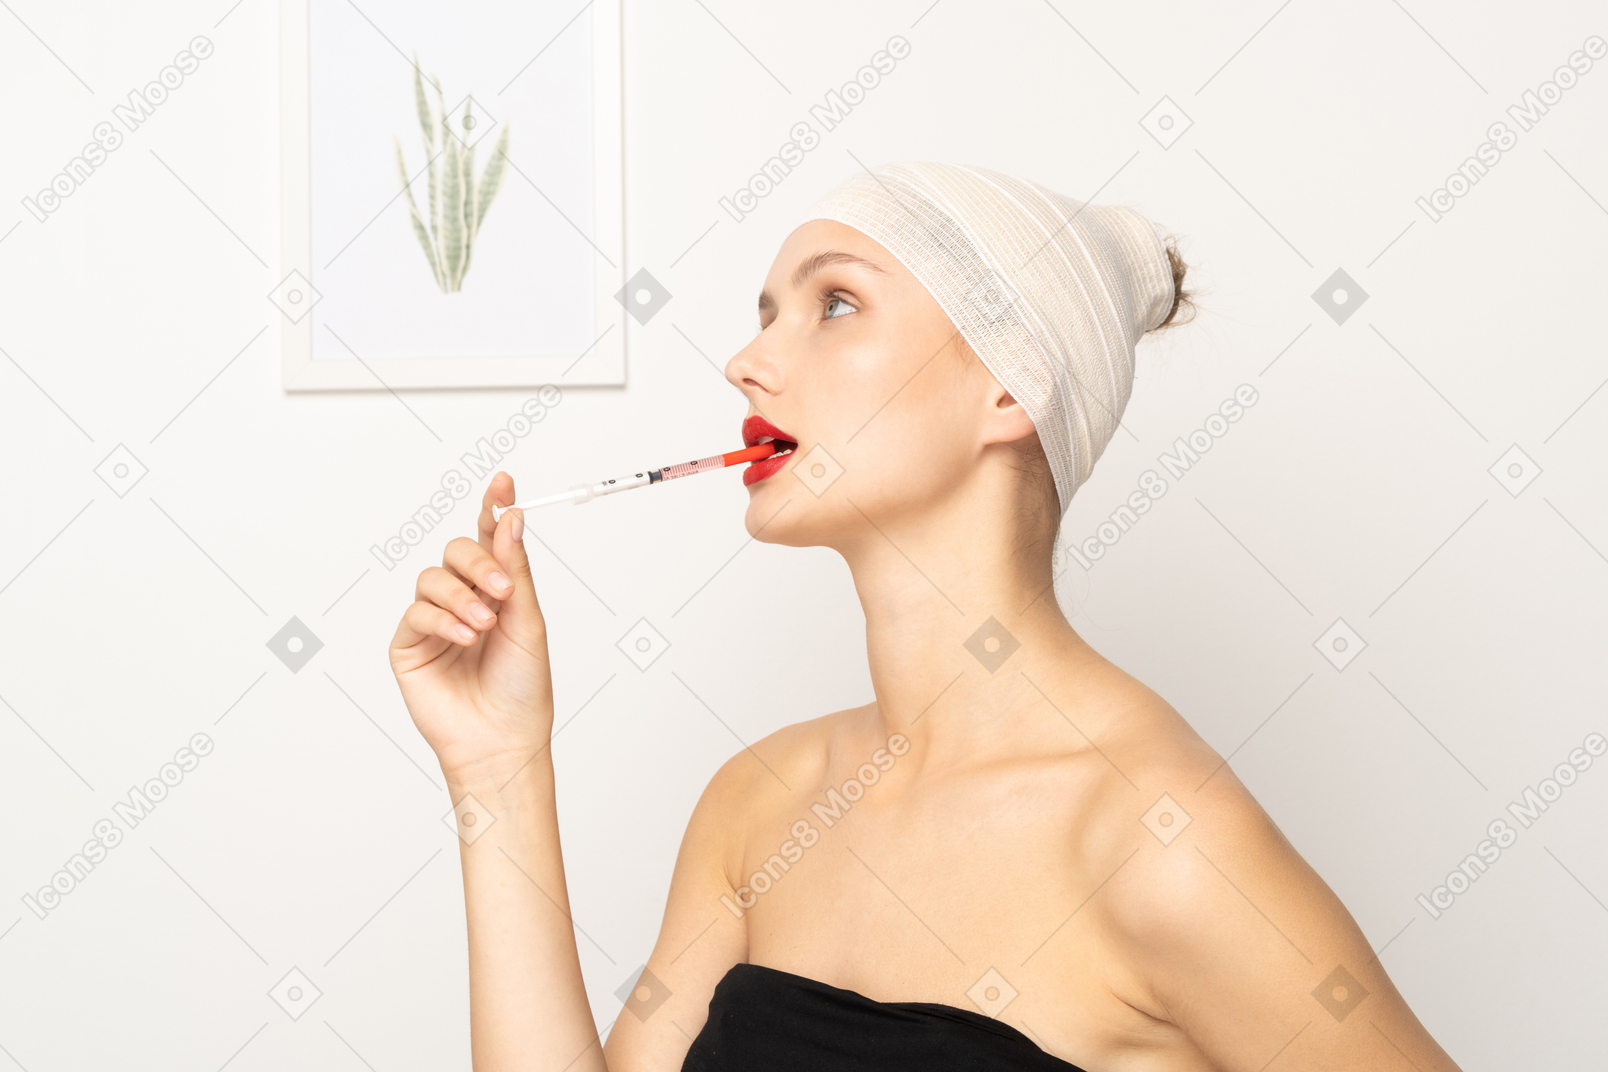 Young woman putting syringe into her mouth